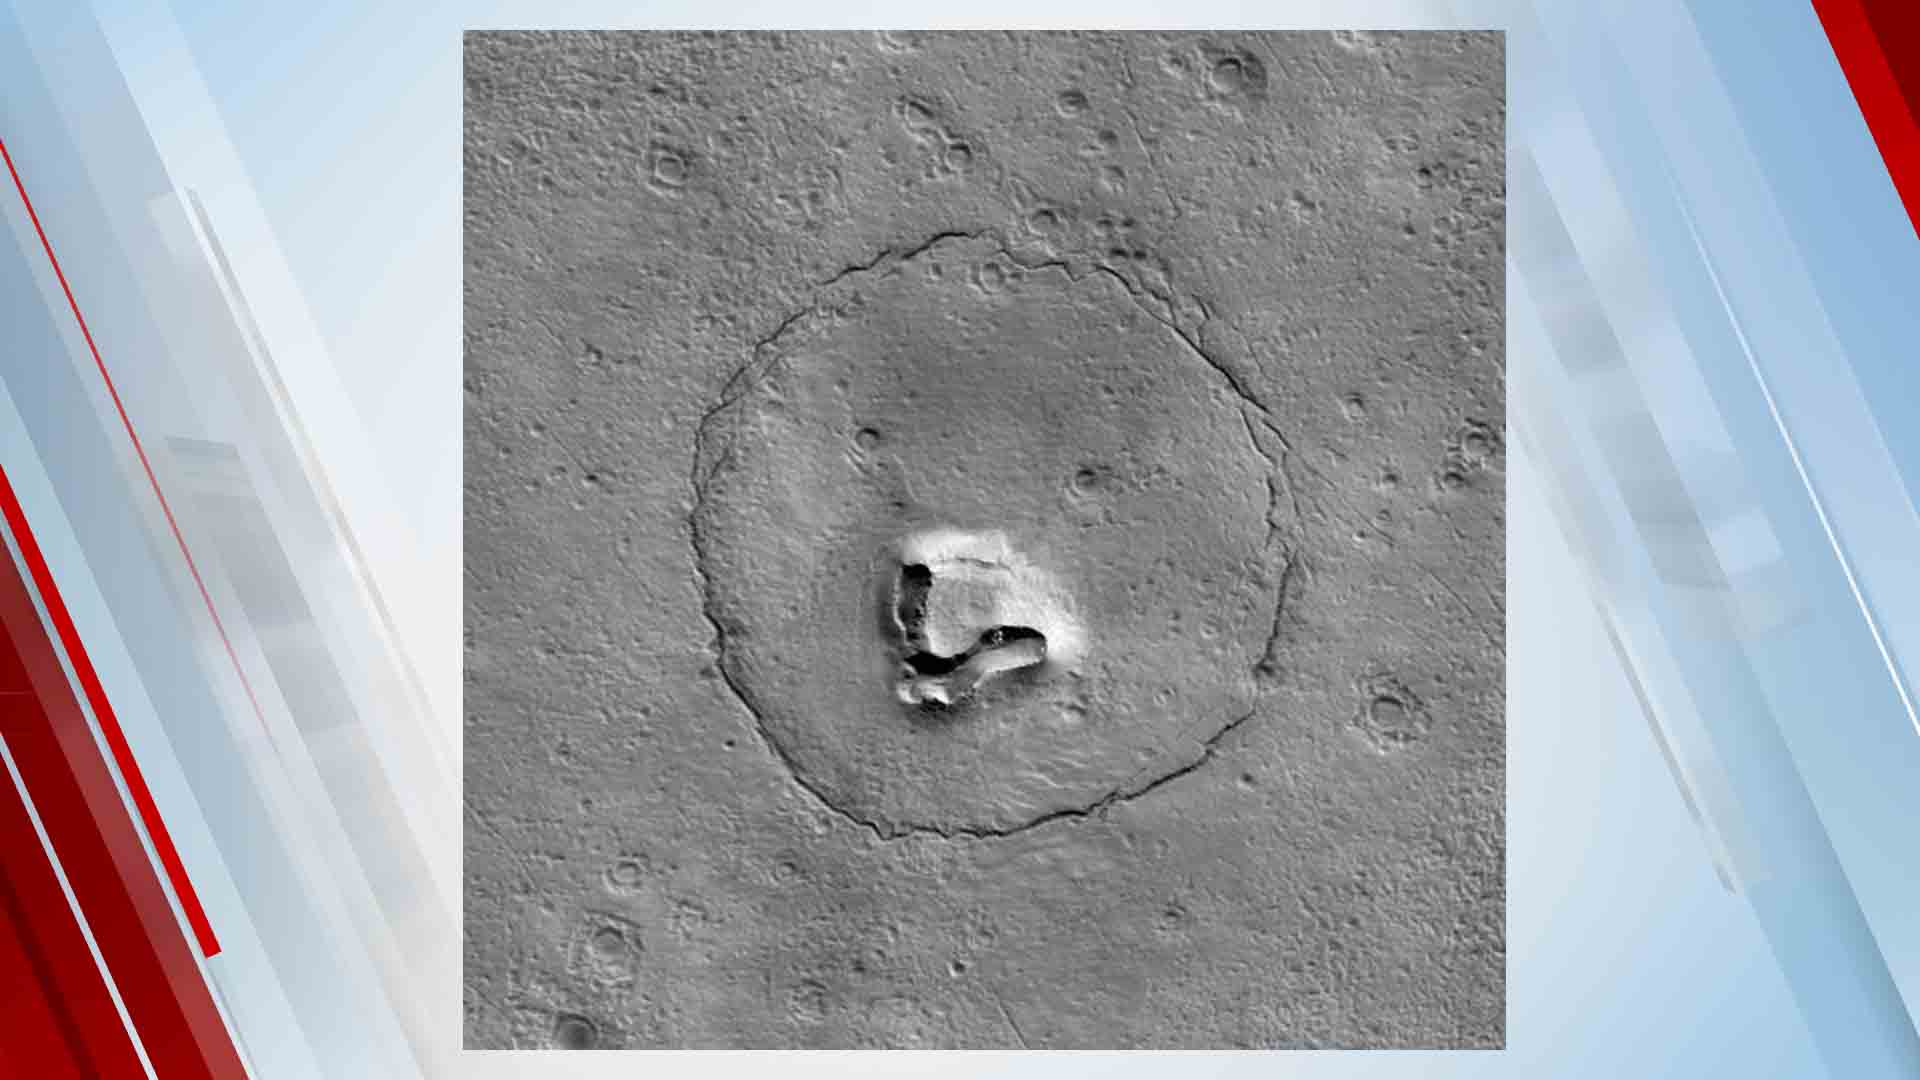 Mars Craters & Cracks Create Adorable Image Of A Teddy Bear In Latest NASA Image